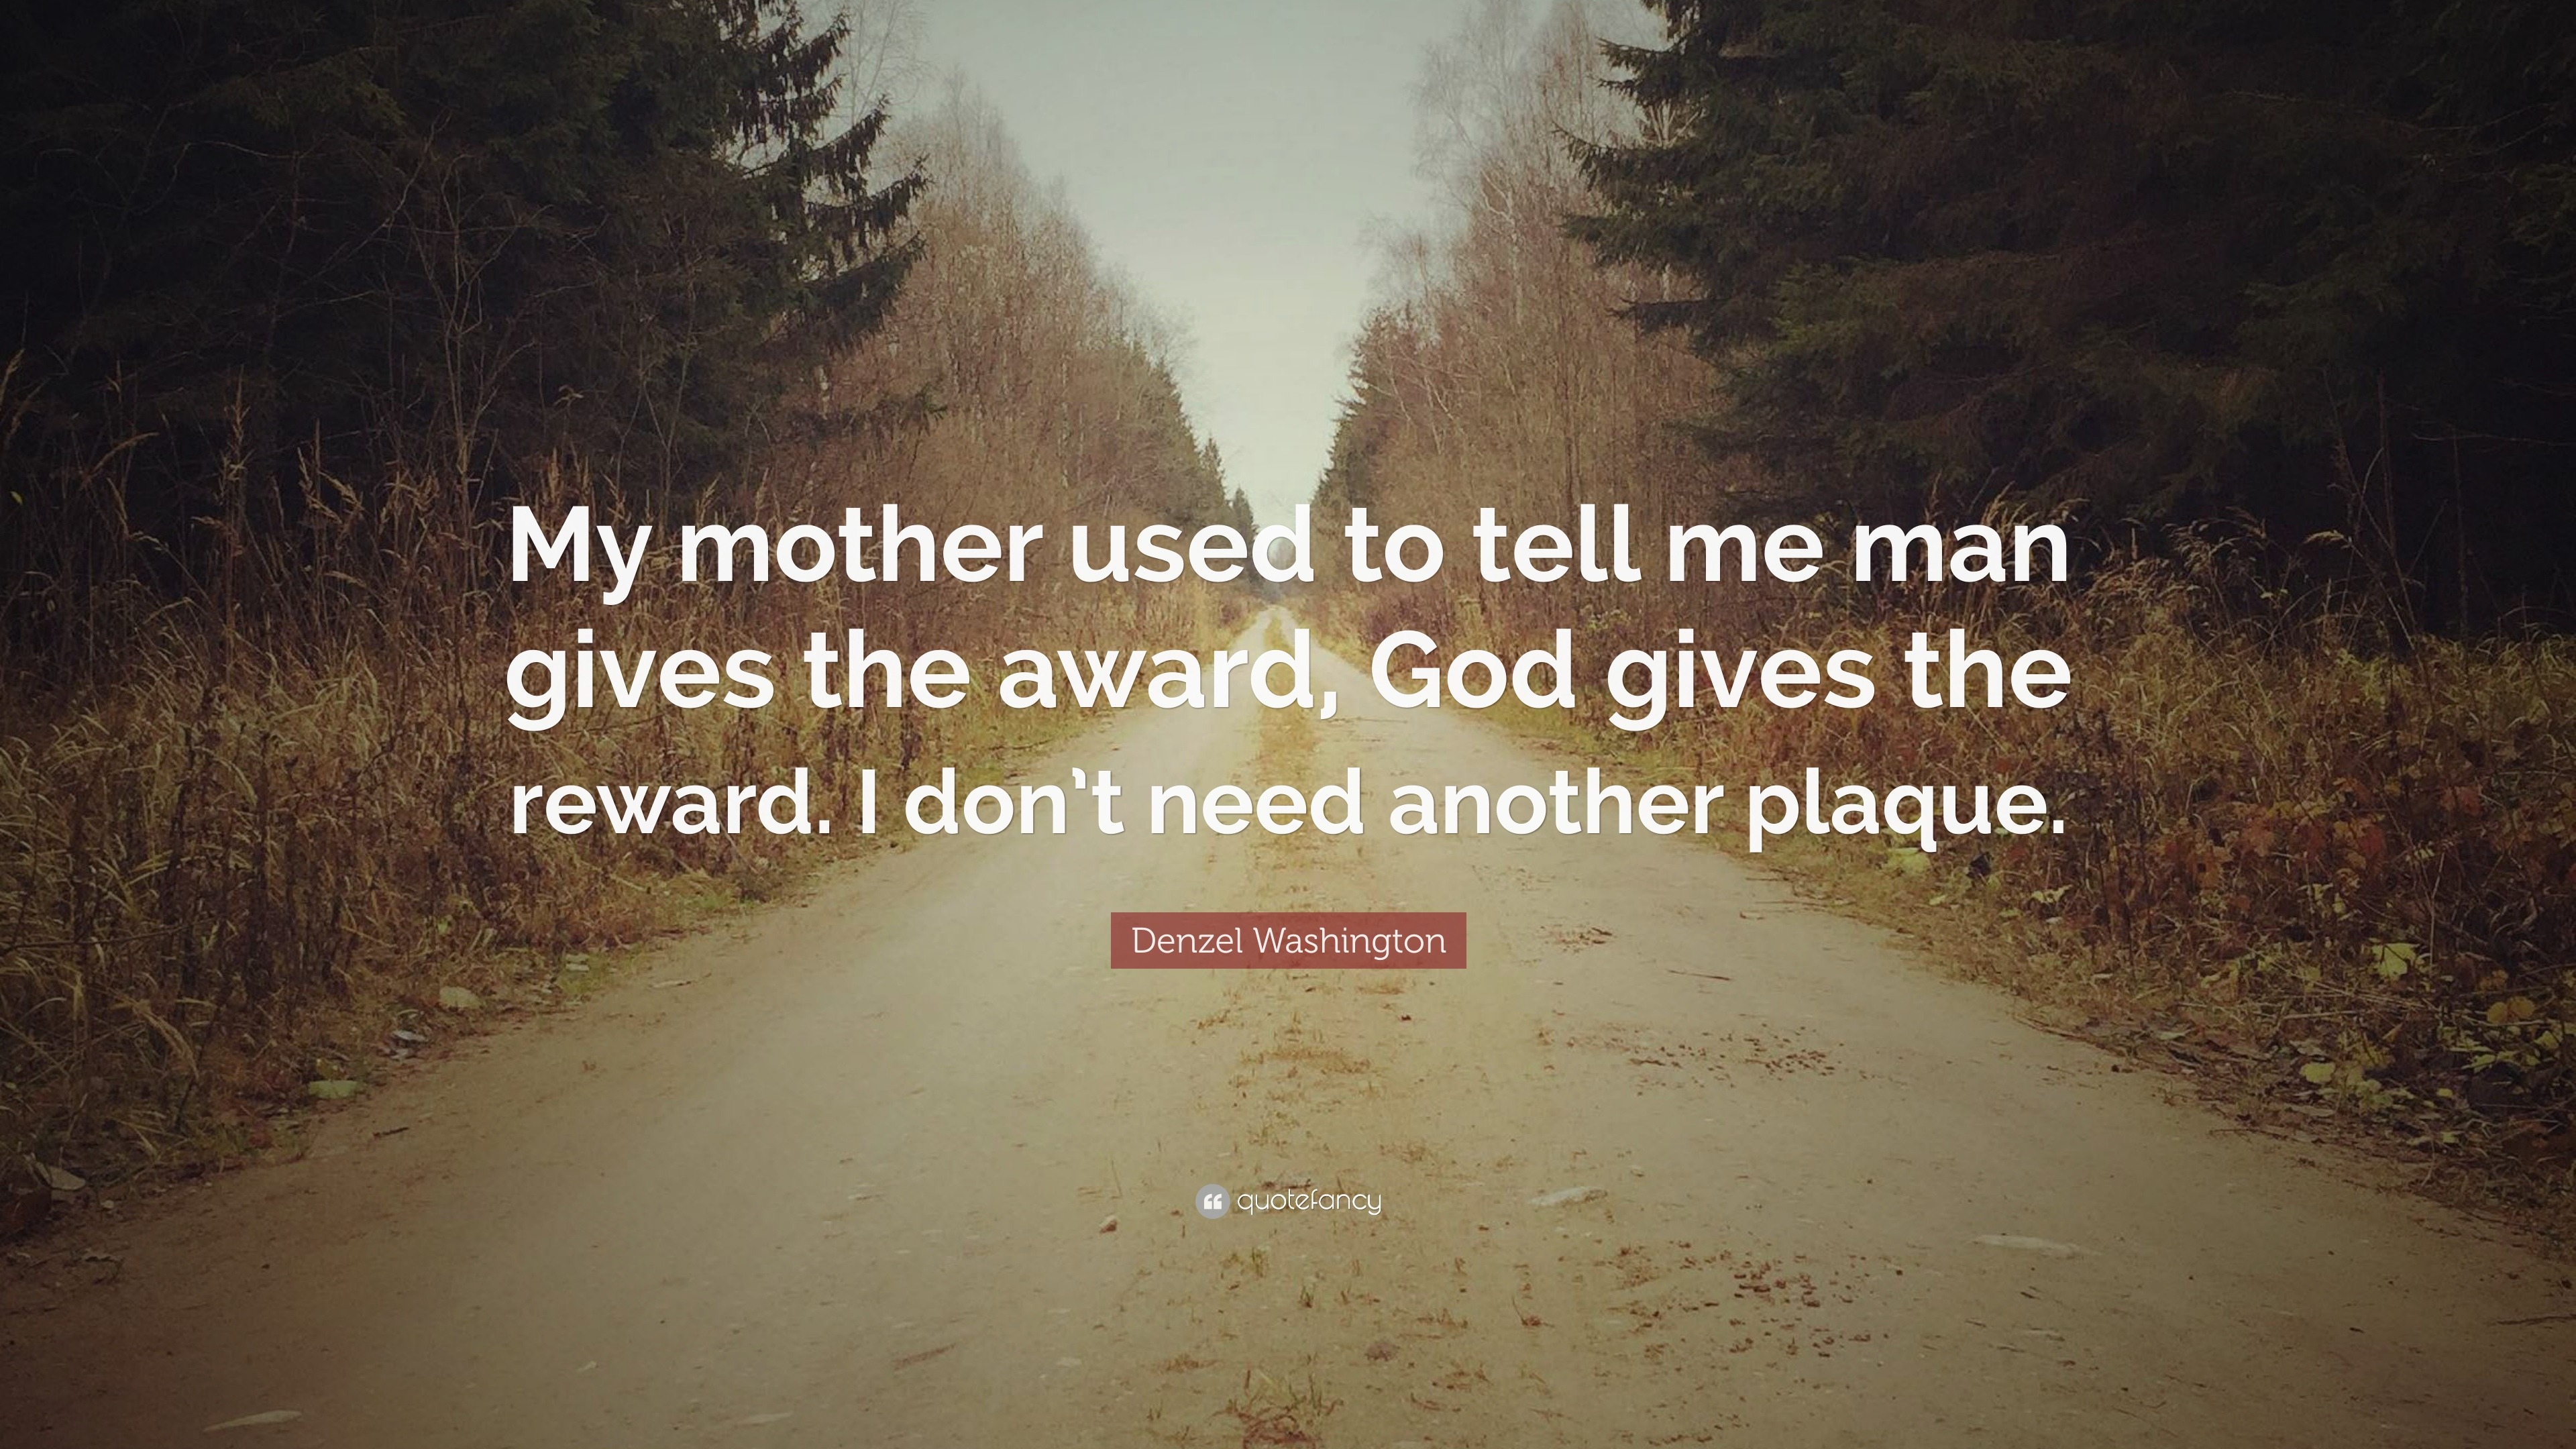 Denzel Washington Quote “my Mother Used To Tell Me Man Gives The Award God Gives The Reward I